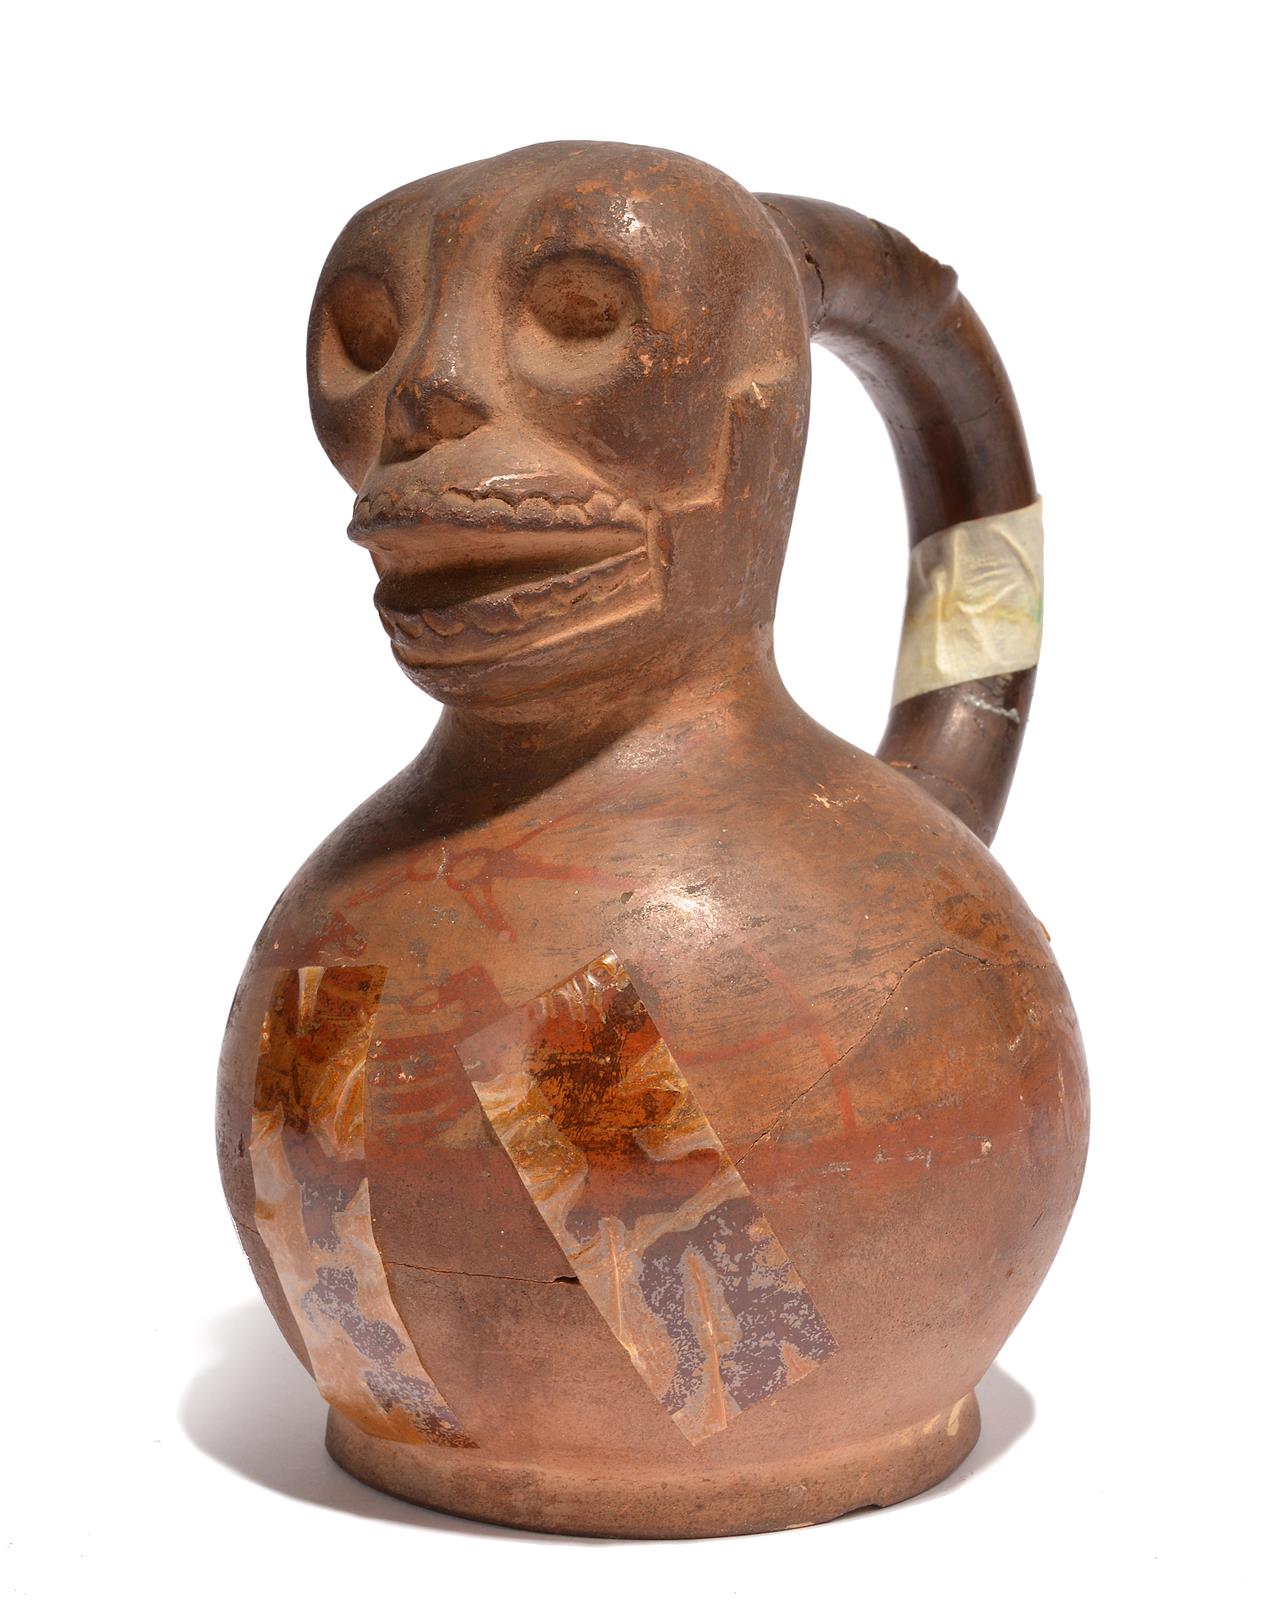 A Moche stirrup vessel Peru, circa 100 - 600 AD pottery with a skull top and with painted cloak